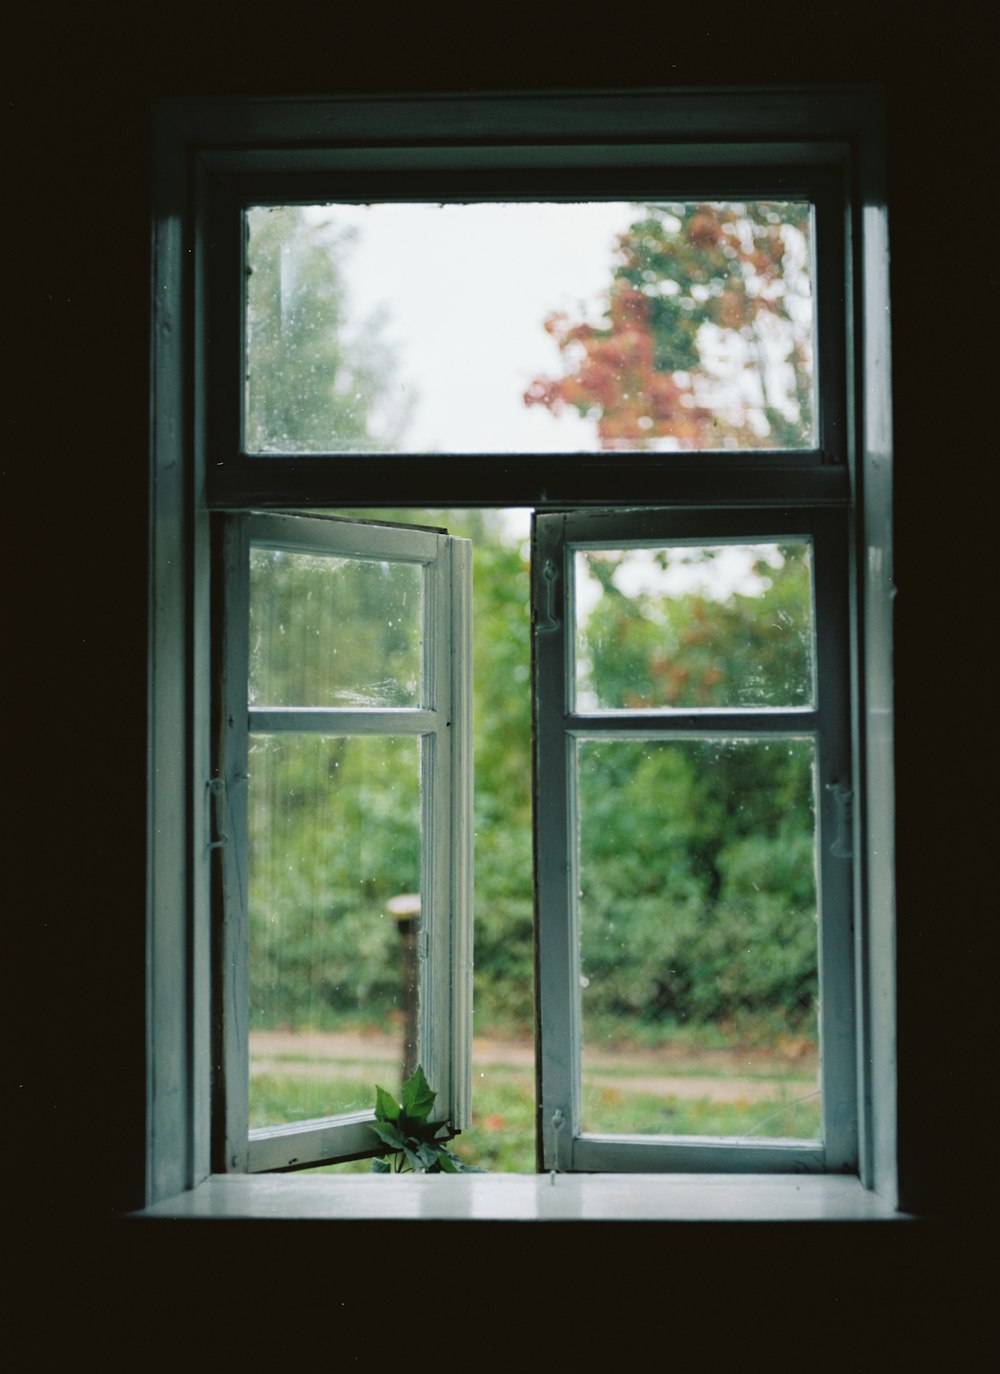 a window with a view of trees outside